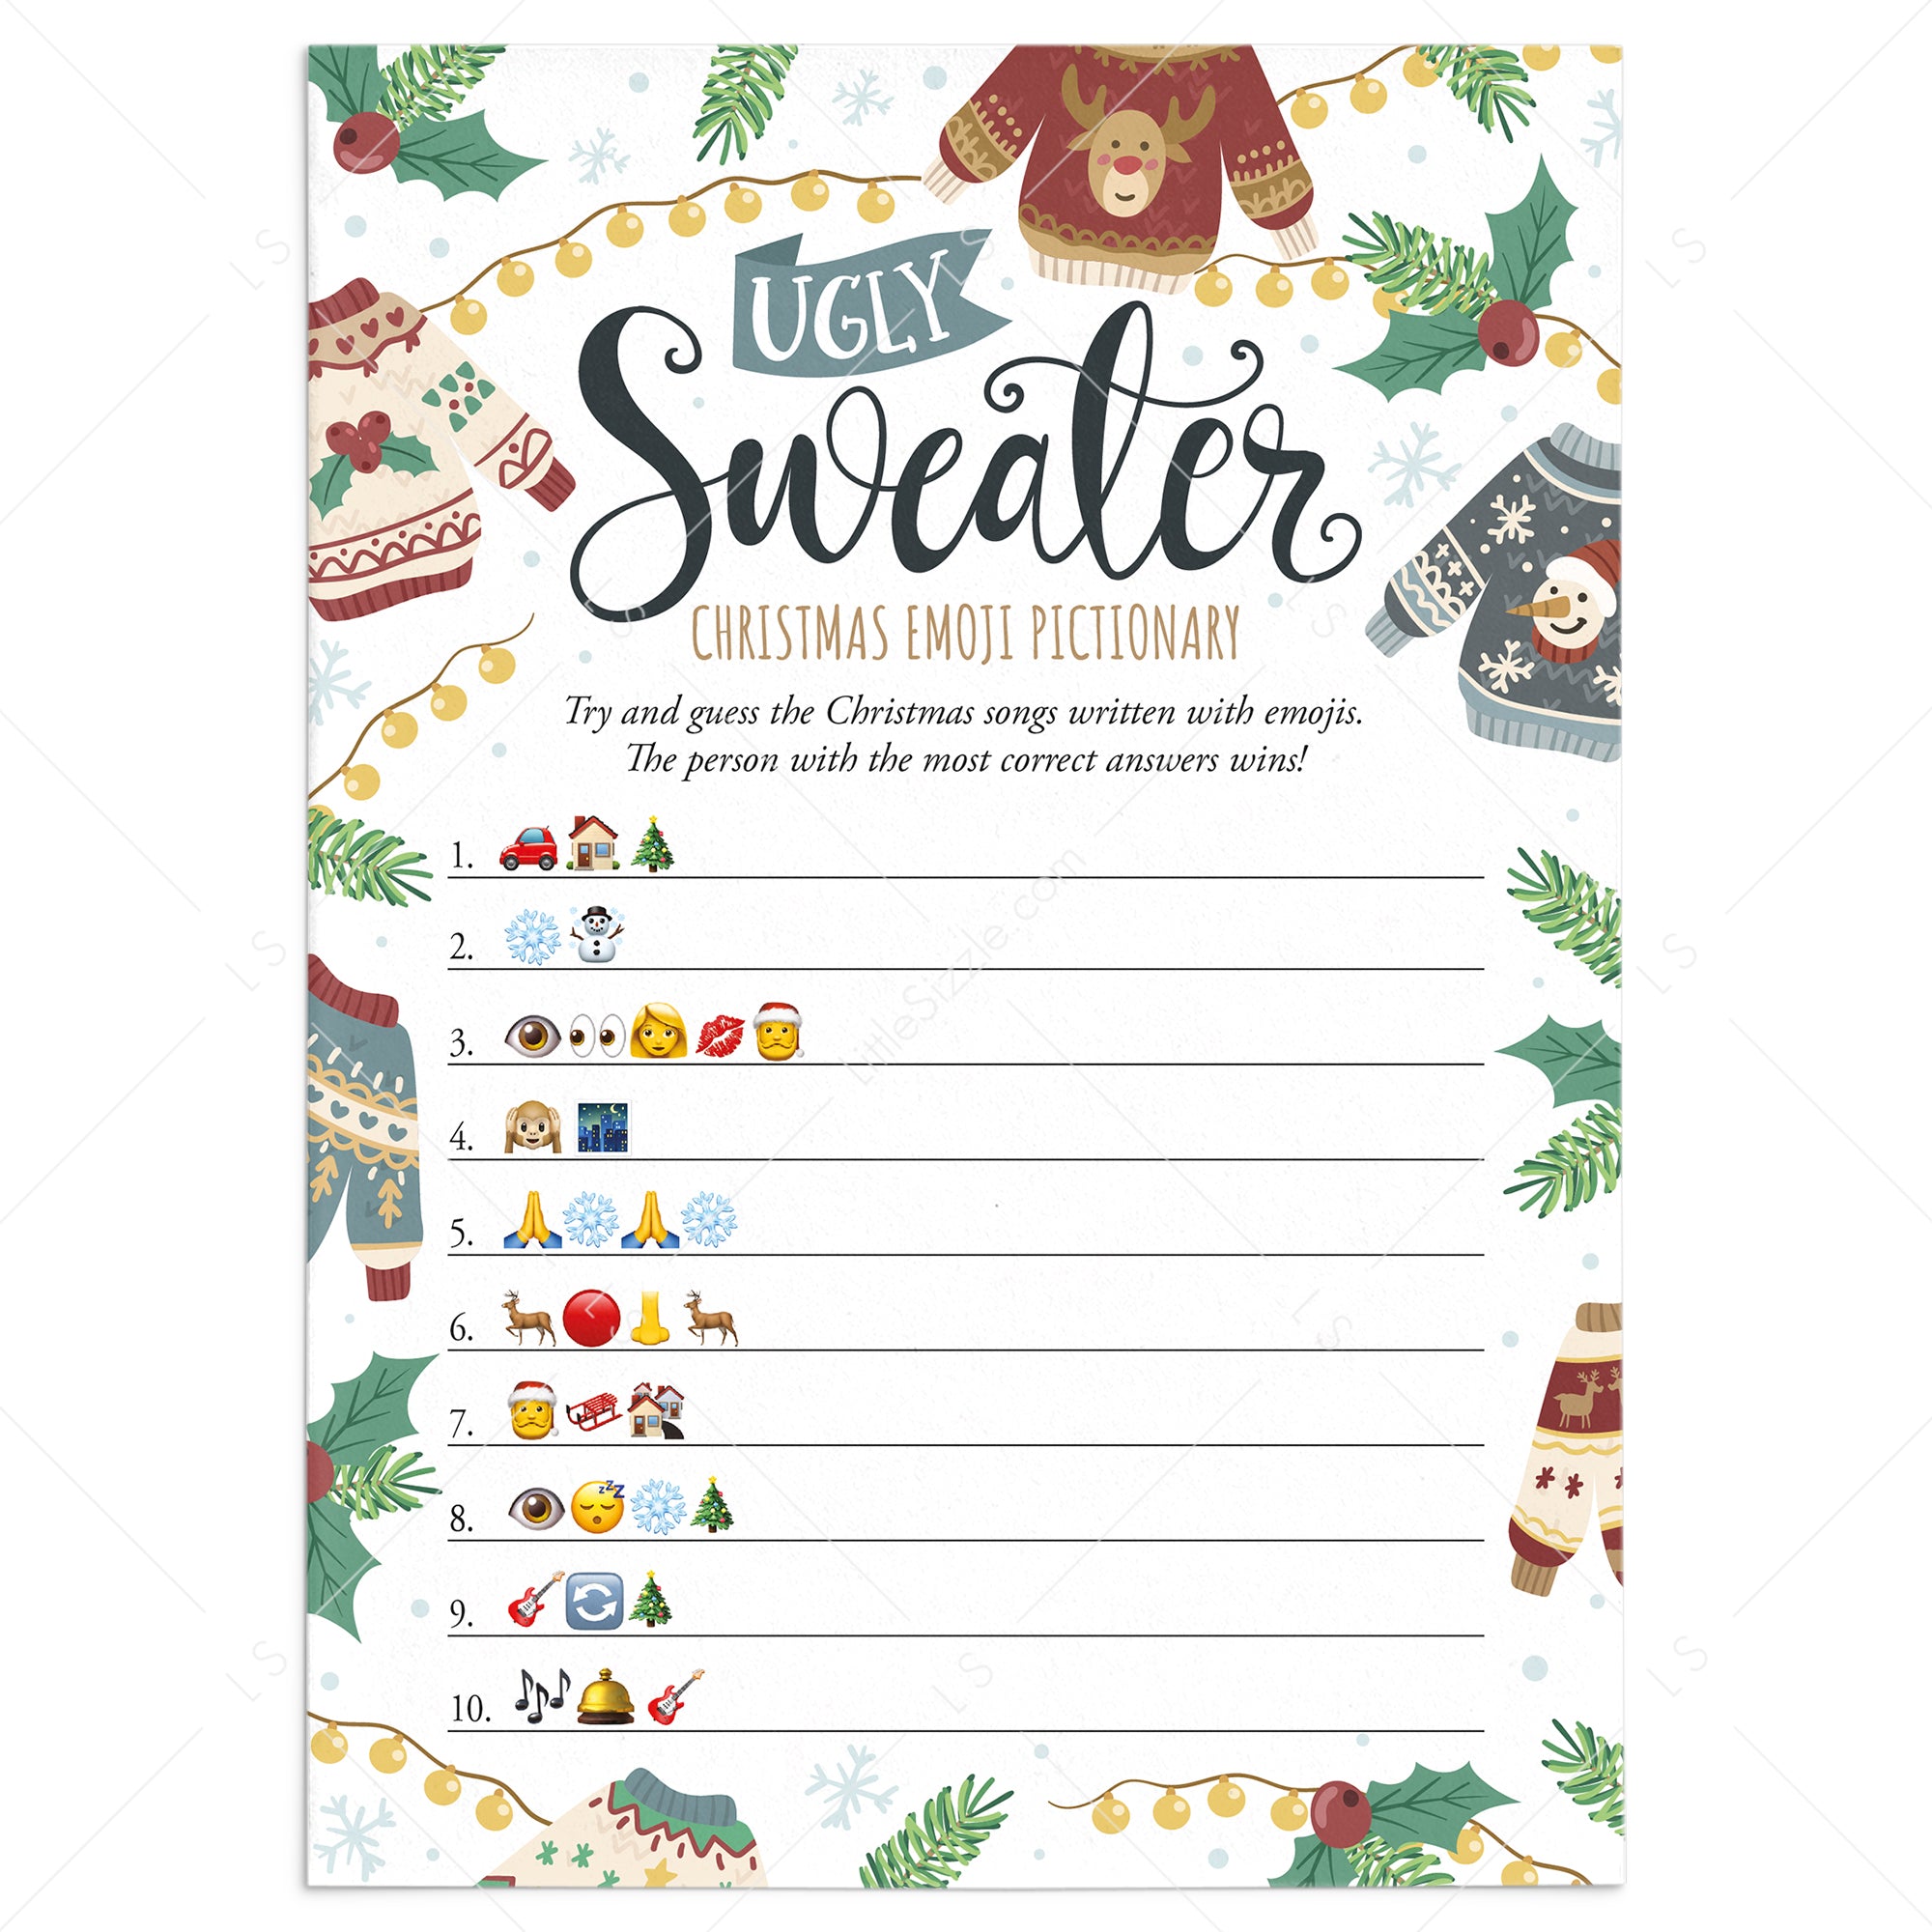 Ugly Christmas Sweater Party Emojis Game with Answers by LittleSizzle